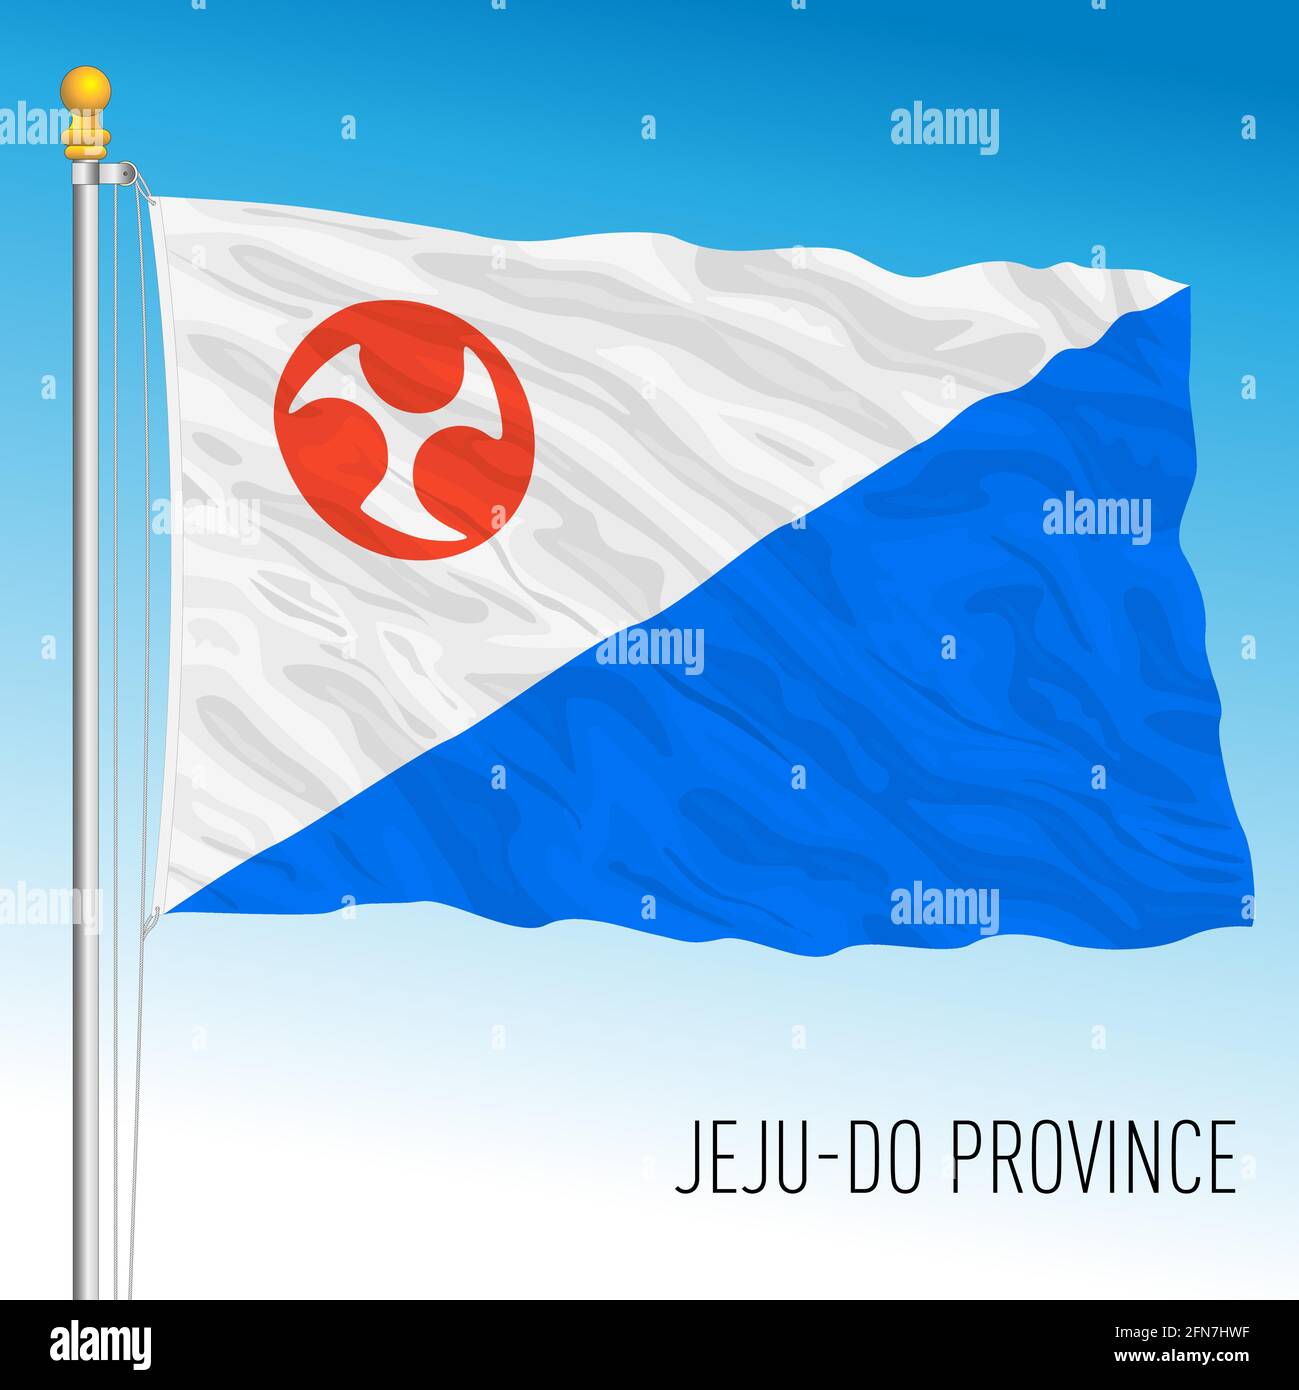 Jeju-Do province, South Korea official flag, asiatic country, vector illustration Stock Vector